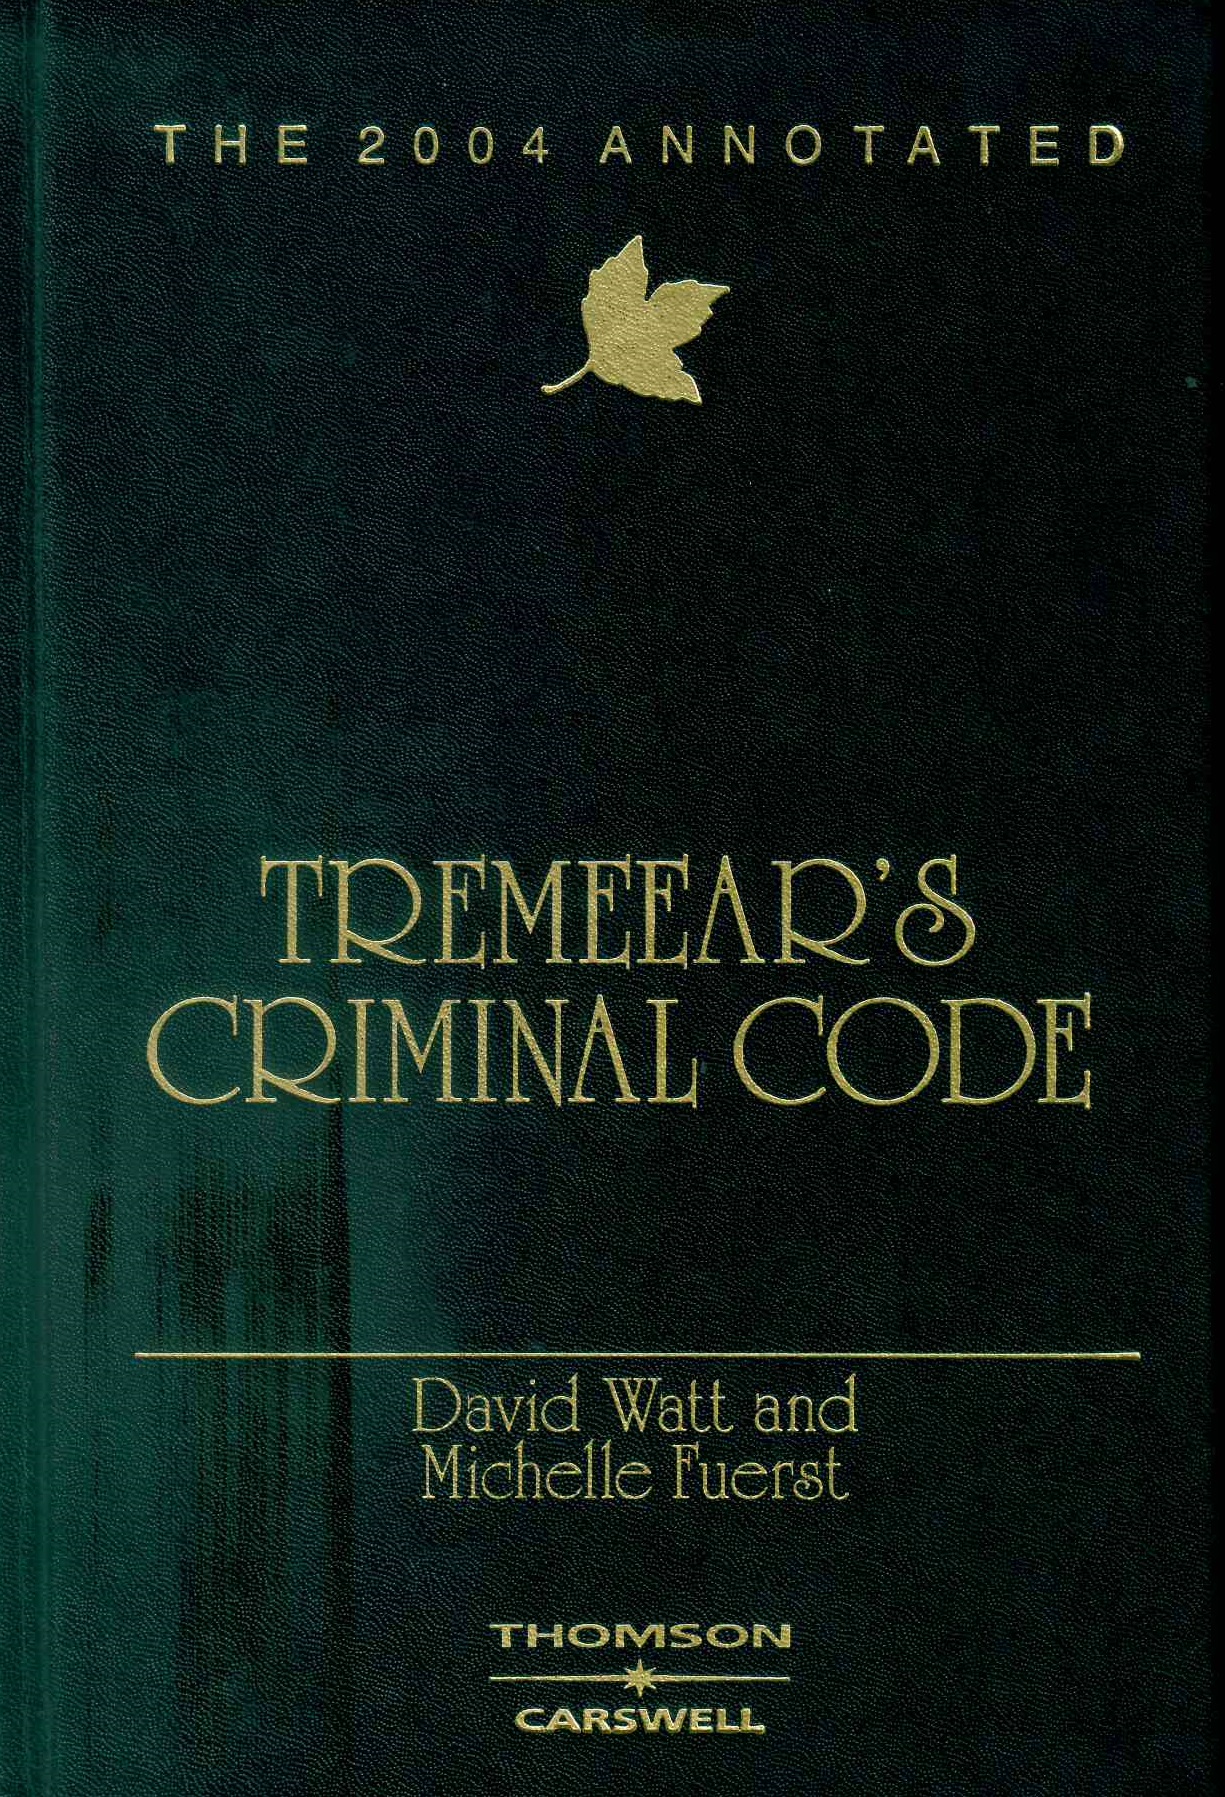 The 2004 annotated Tremeear's criminal code